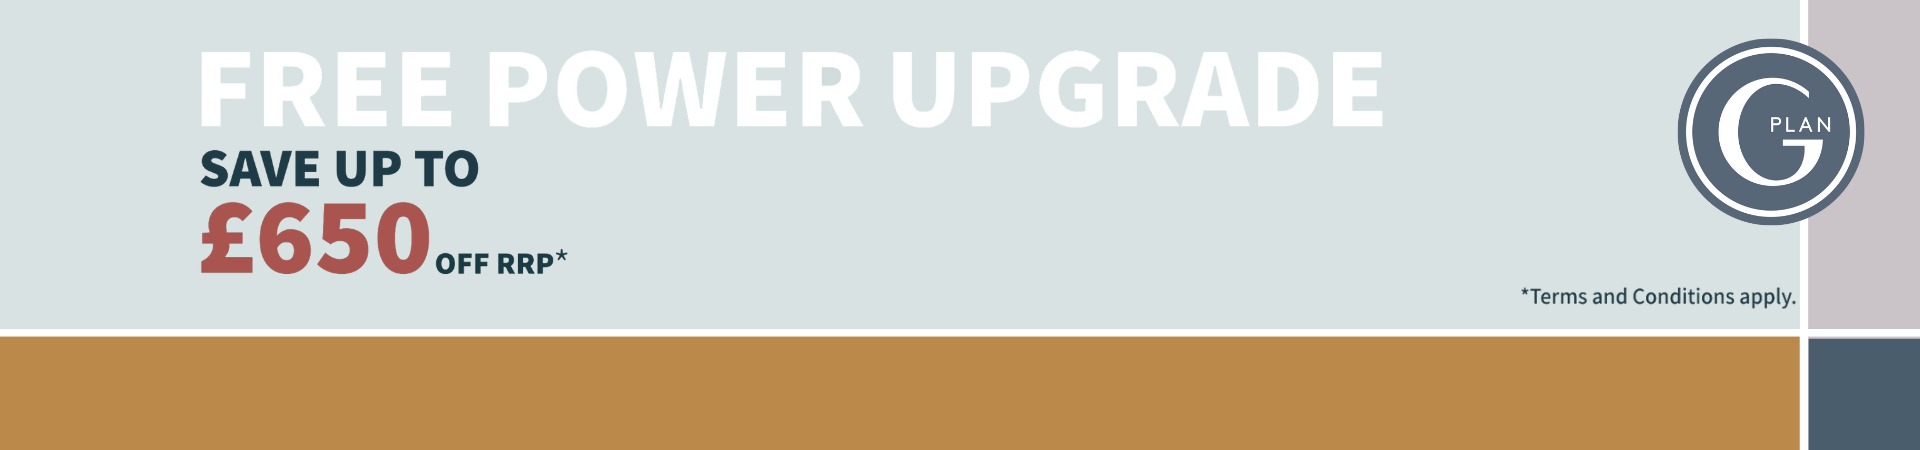 G Plan Power Upgrade Collections Banner 